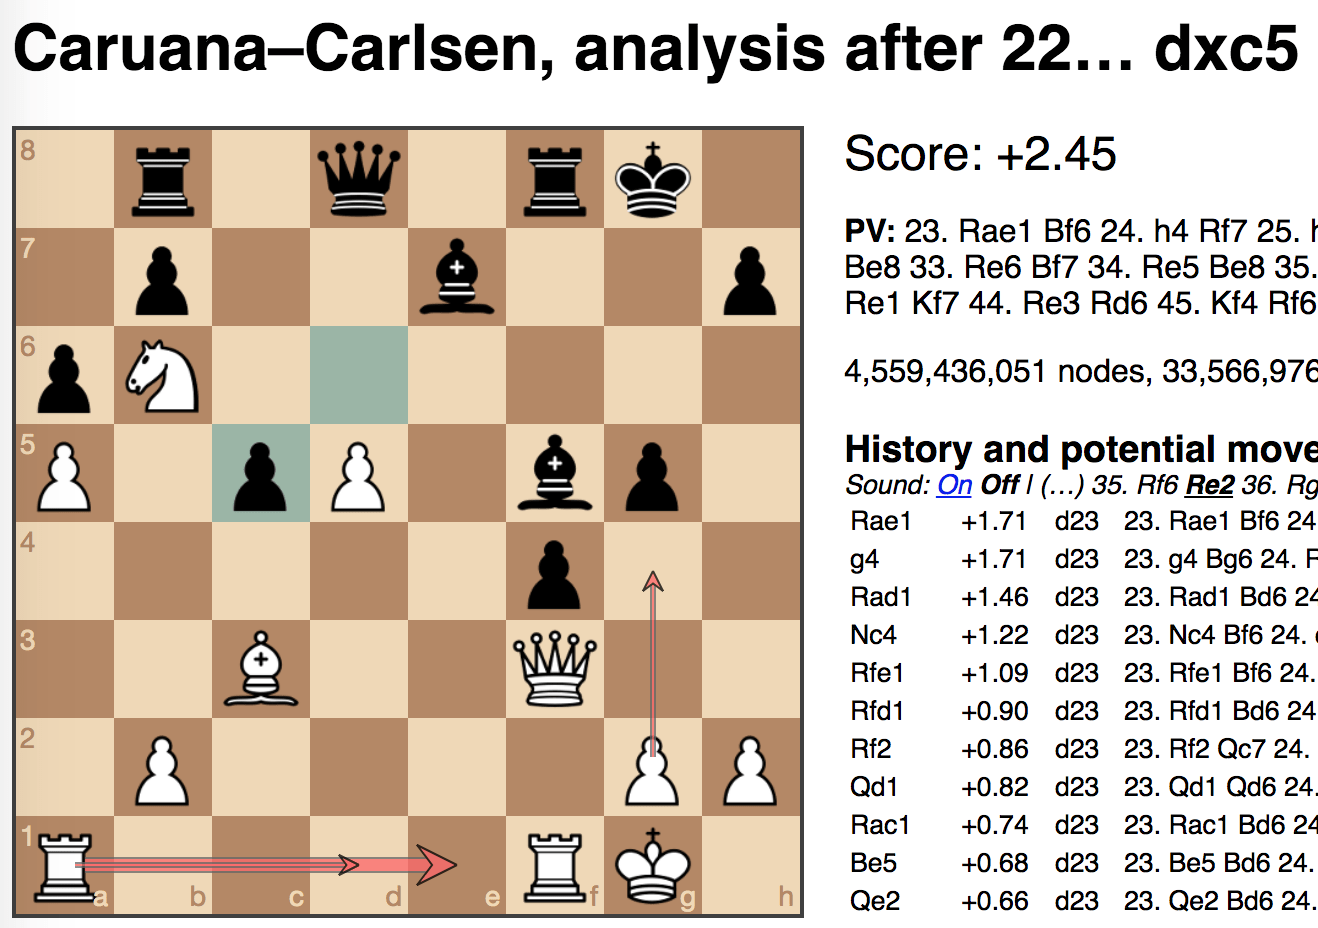 Back and forth battle sees game eight end in a draw at World Chess  Championship